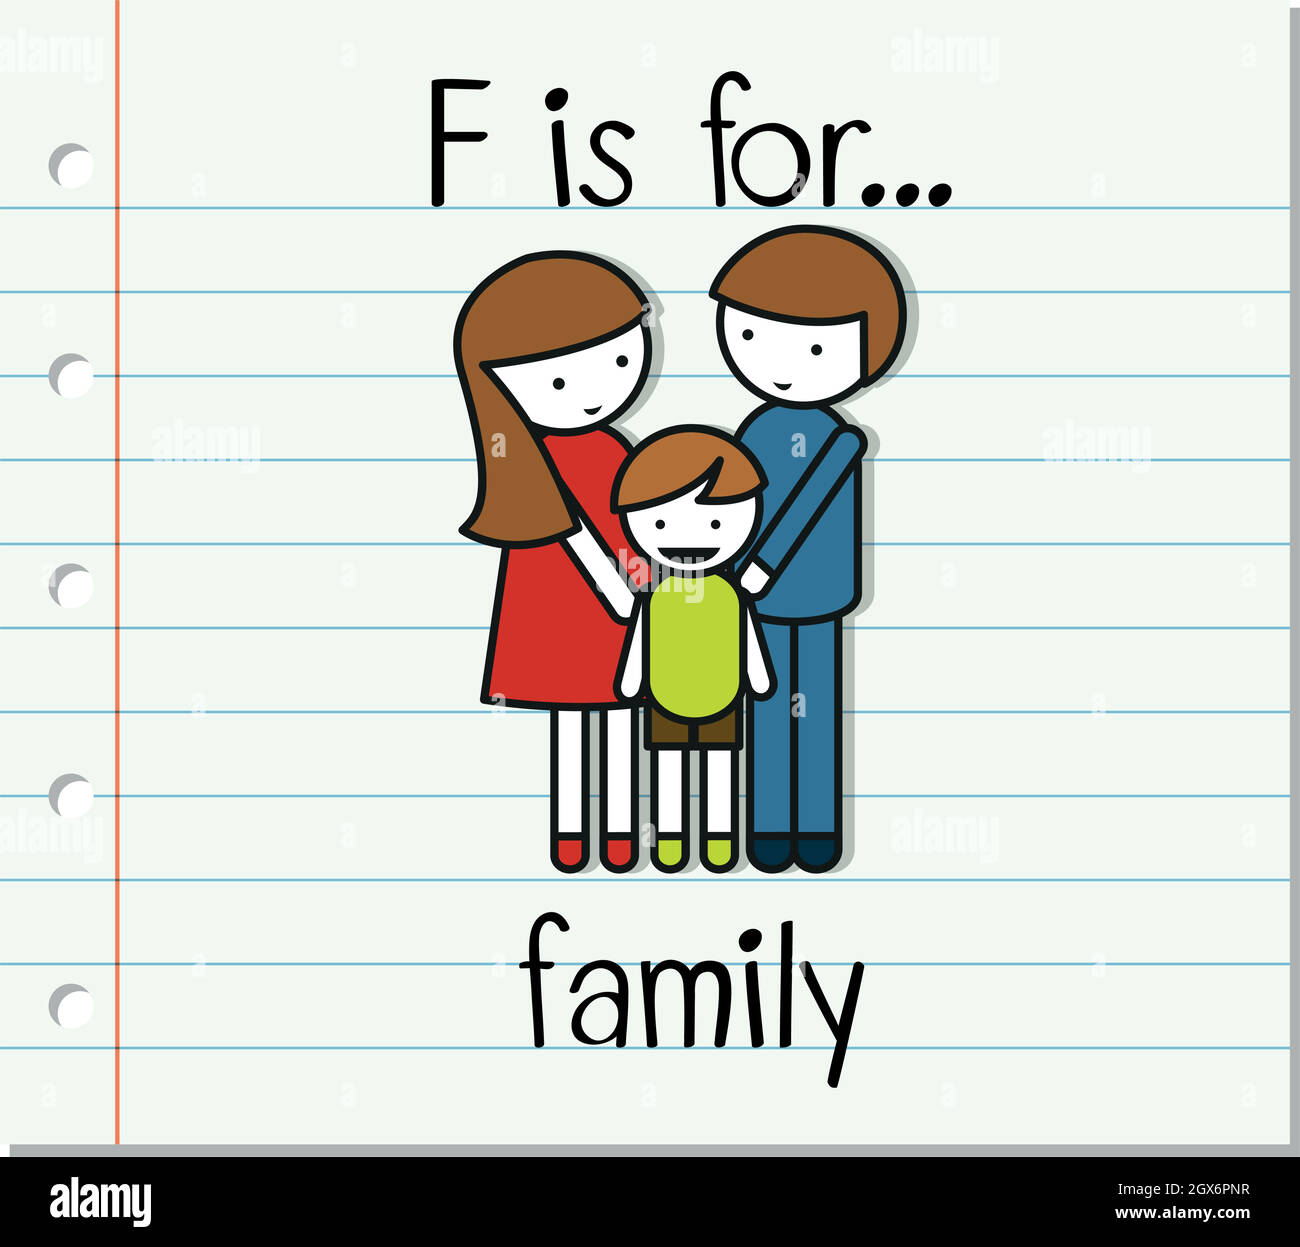 Flashcard letter F is for family Stock Vector